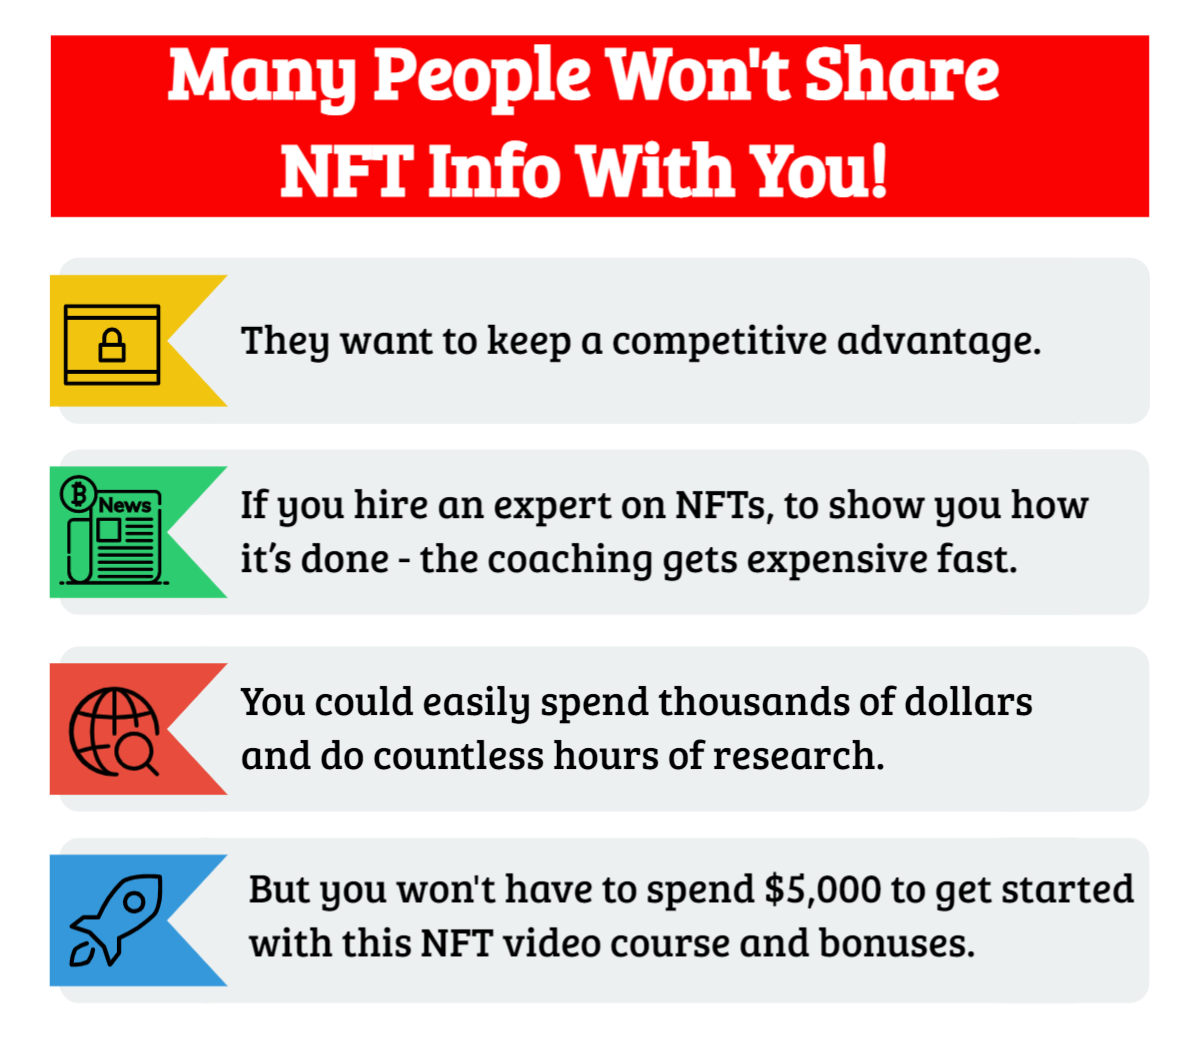 Ready To Learn More About NFTs and How YOU Can Profit From Them?